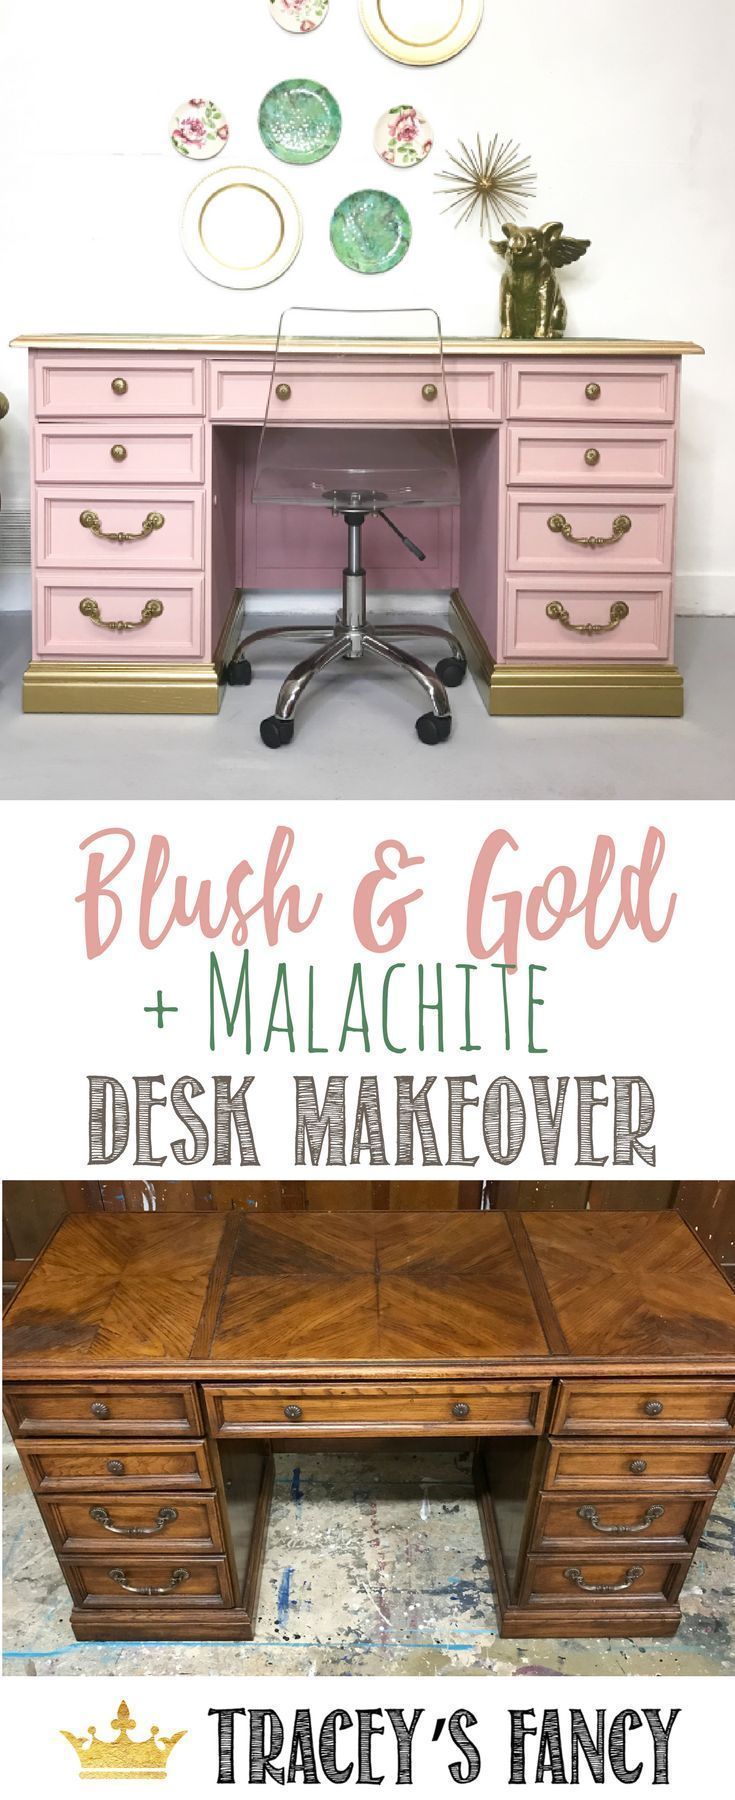 Gorgeous Green Malachite Desk Makeover by Tracey's Fancy - Gorgeous Green Malachite Desk Makeover by Tracey's Fancy -   15 diy Desk paint ideas